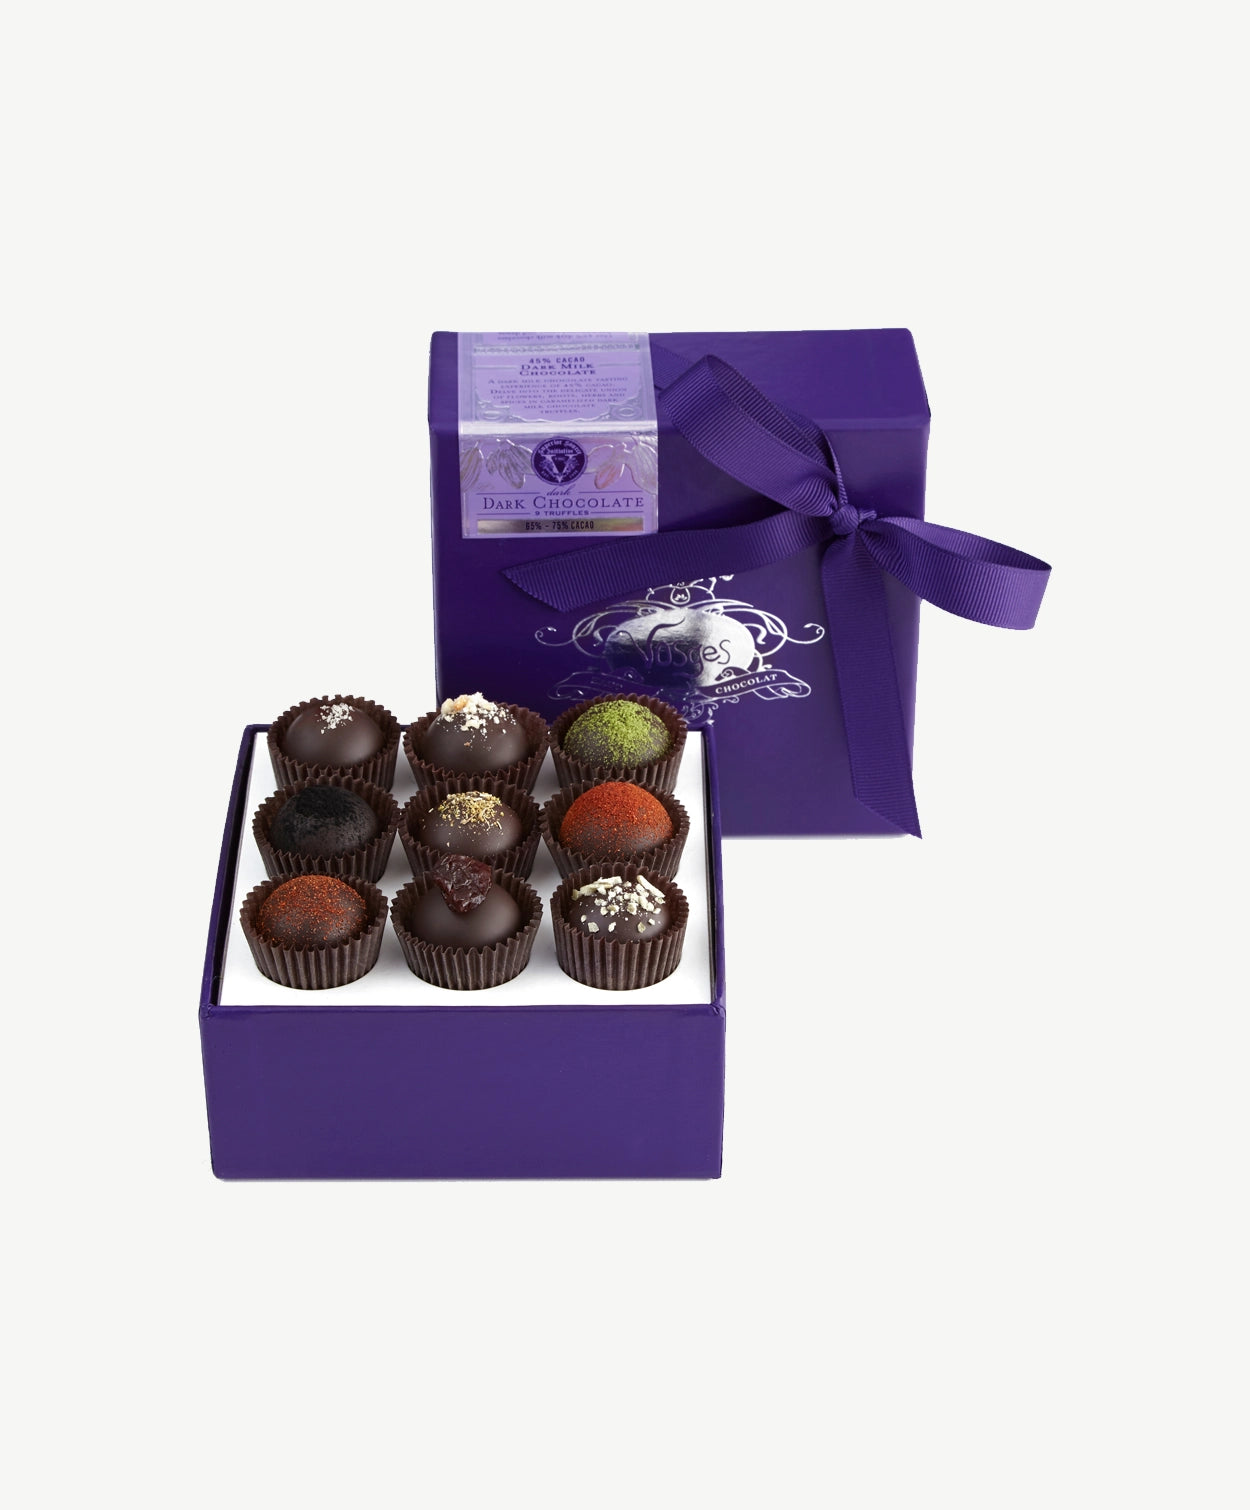 A small purple candy box tied with a purple ribbon bow sits upright displaying three rows of dark chocolate truffles adorned in colorful toppings and chopped nuts on a light grey background.